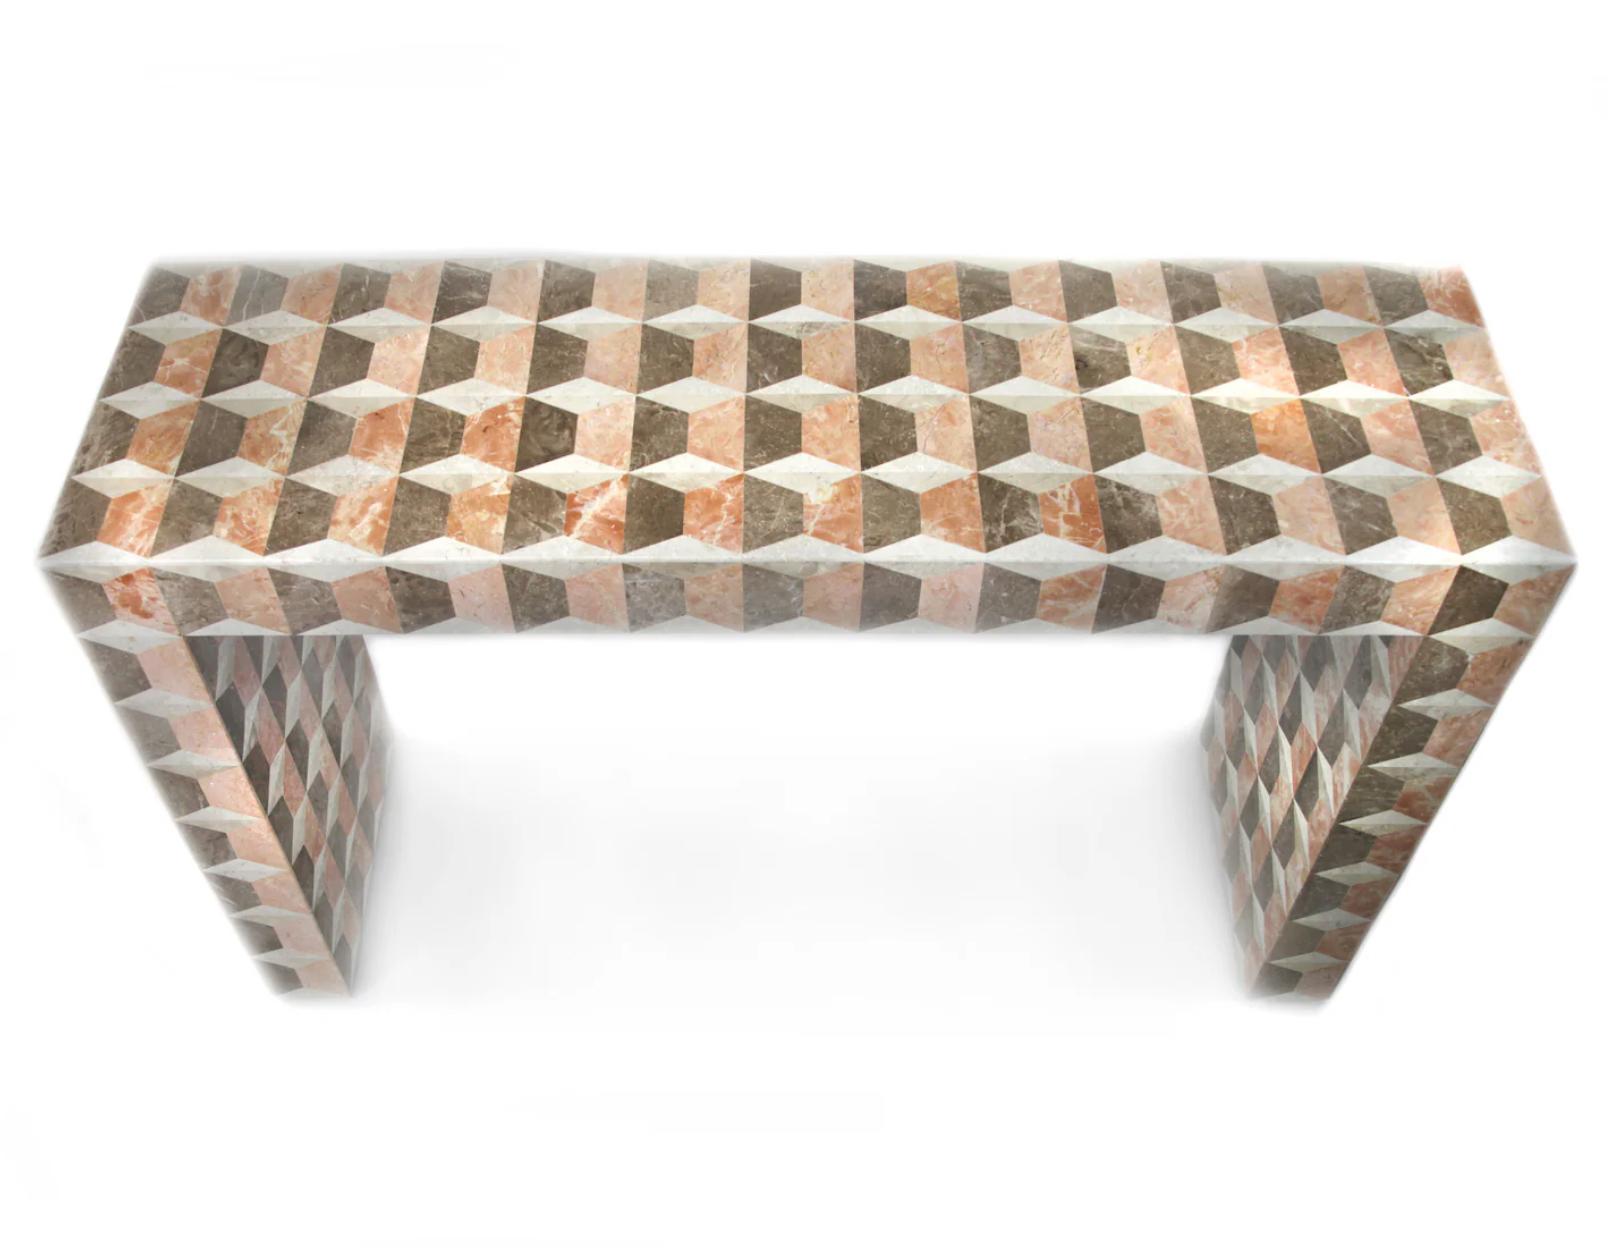 Inspired by the marvelous patterns of Fornasetti, the Milano console table is a bold accent piece for any setting. Using Fossil stones and Rose Marble craftsmen in the Philippines meticulously inlaid the natural materials in a geometric pattern.